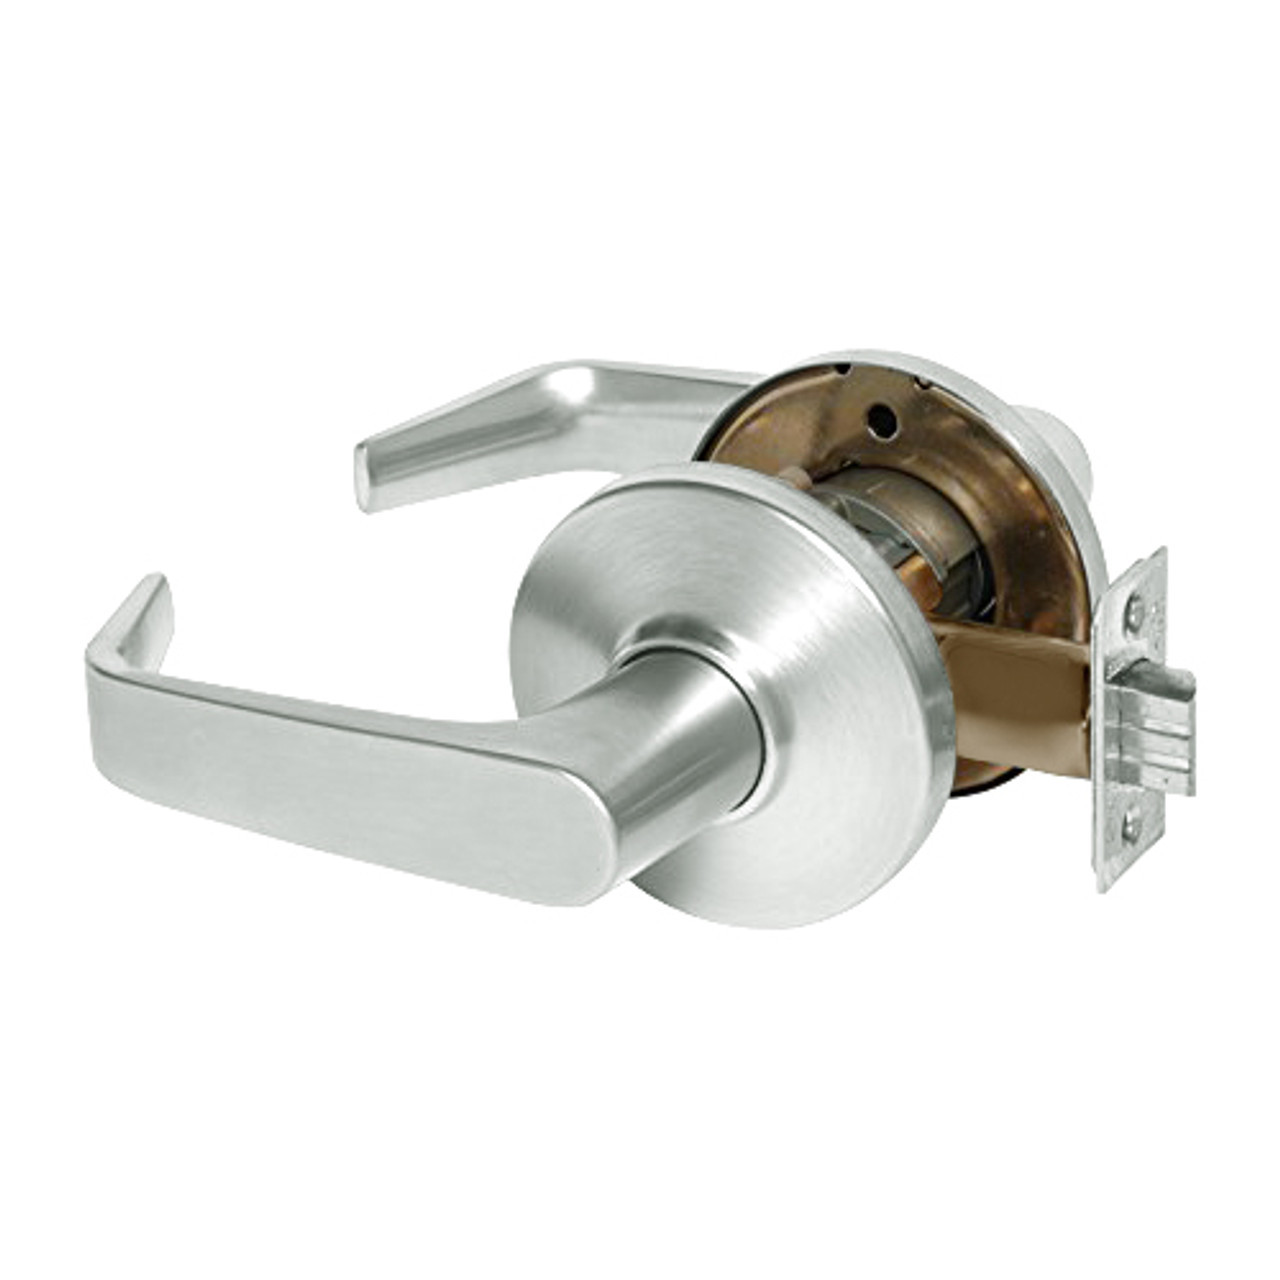 9K30N15DS3618LM Best 9K Series Passage Heavy Duty Cylindrical Lever Locks with Contour Angle with Return Lever Design in Bright Nickel